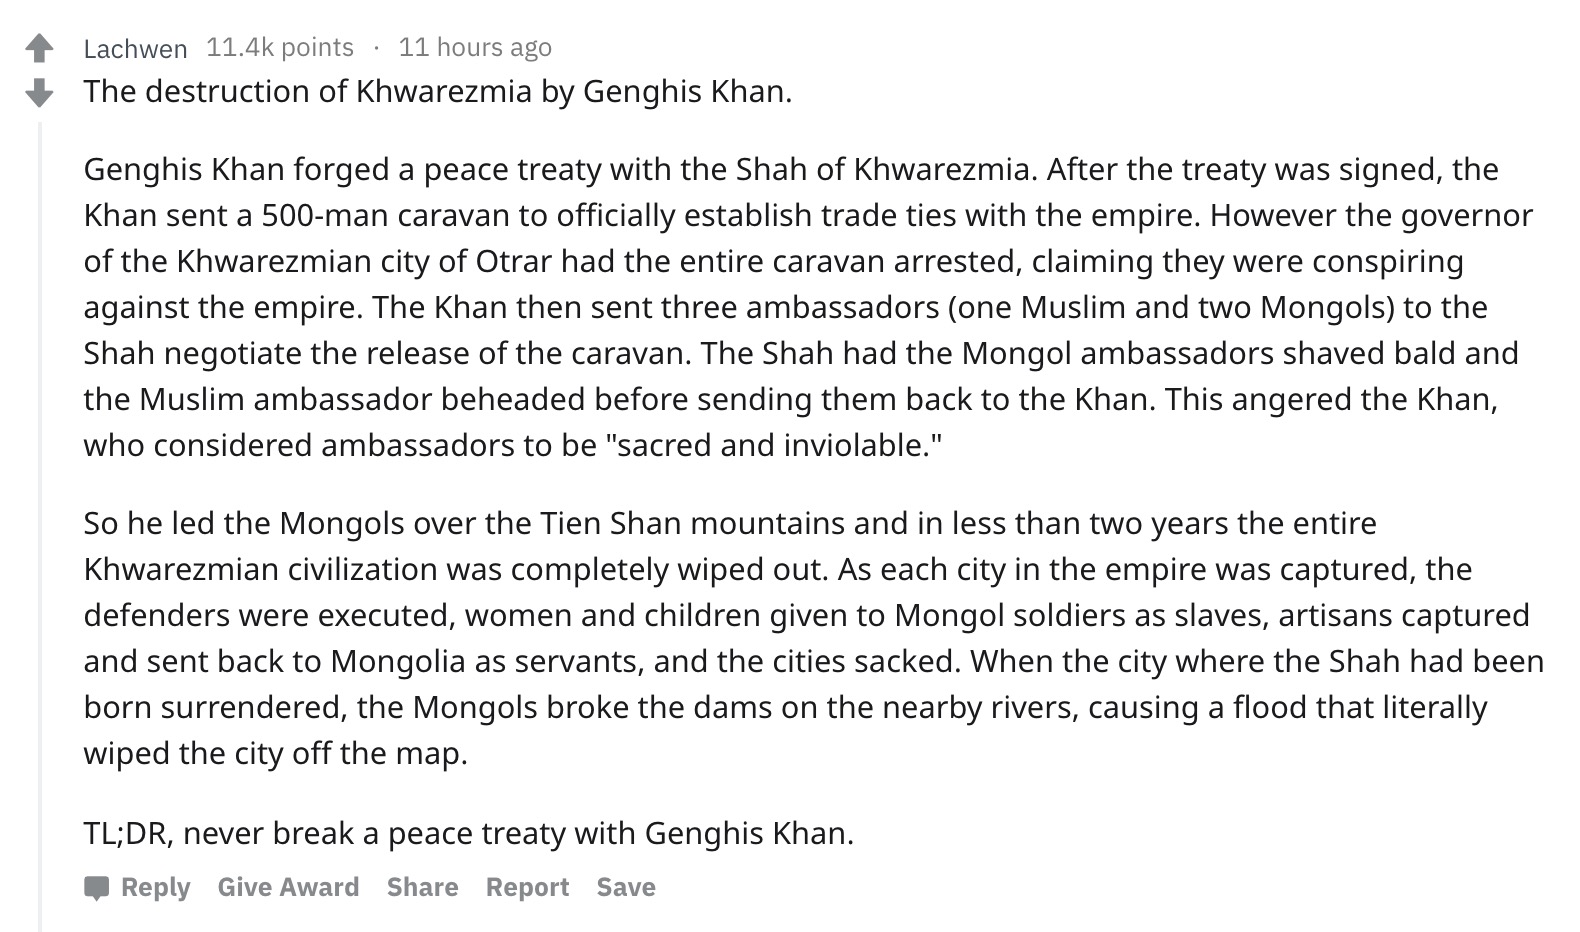 document - Lachwen points 11 hours ago The destruction of Khwarezmia by Genghis Khan. Genghis Khan forged a peace treaty with the Shah of Khwarezmia. After the treaty was signed, the Khan sent a 500man caravan to officially establish trade ties with the e